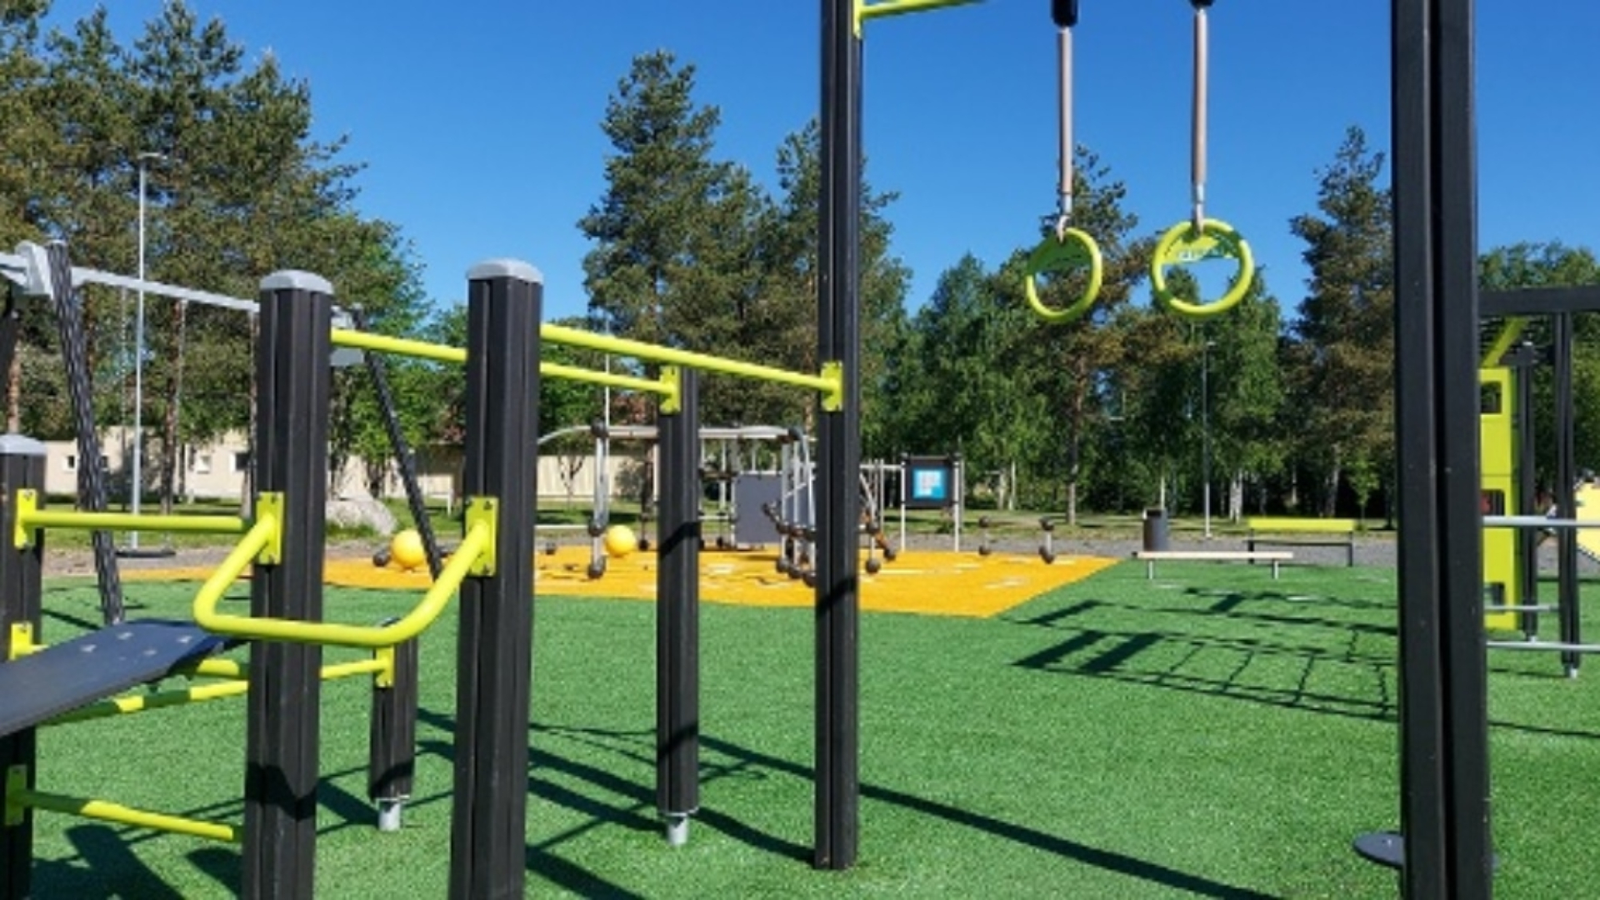 Education ministry plans outdoor gyms for Islamabad’s model schools